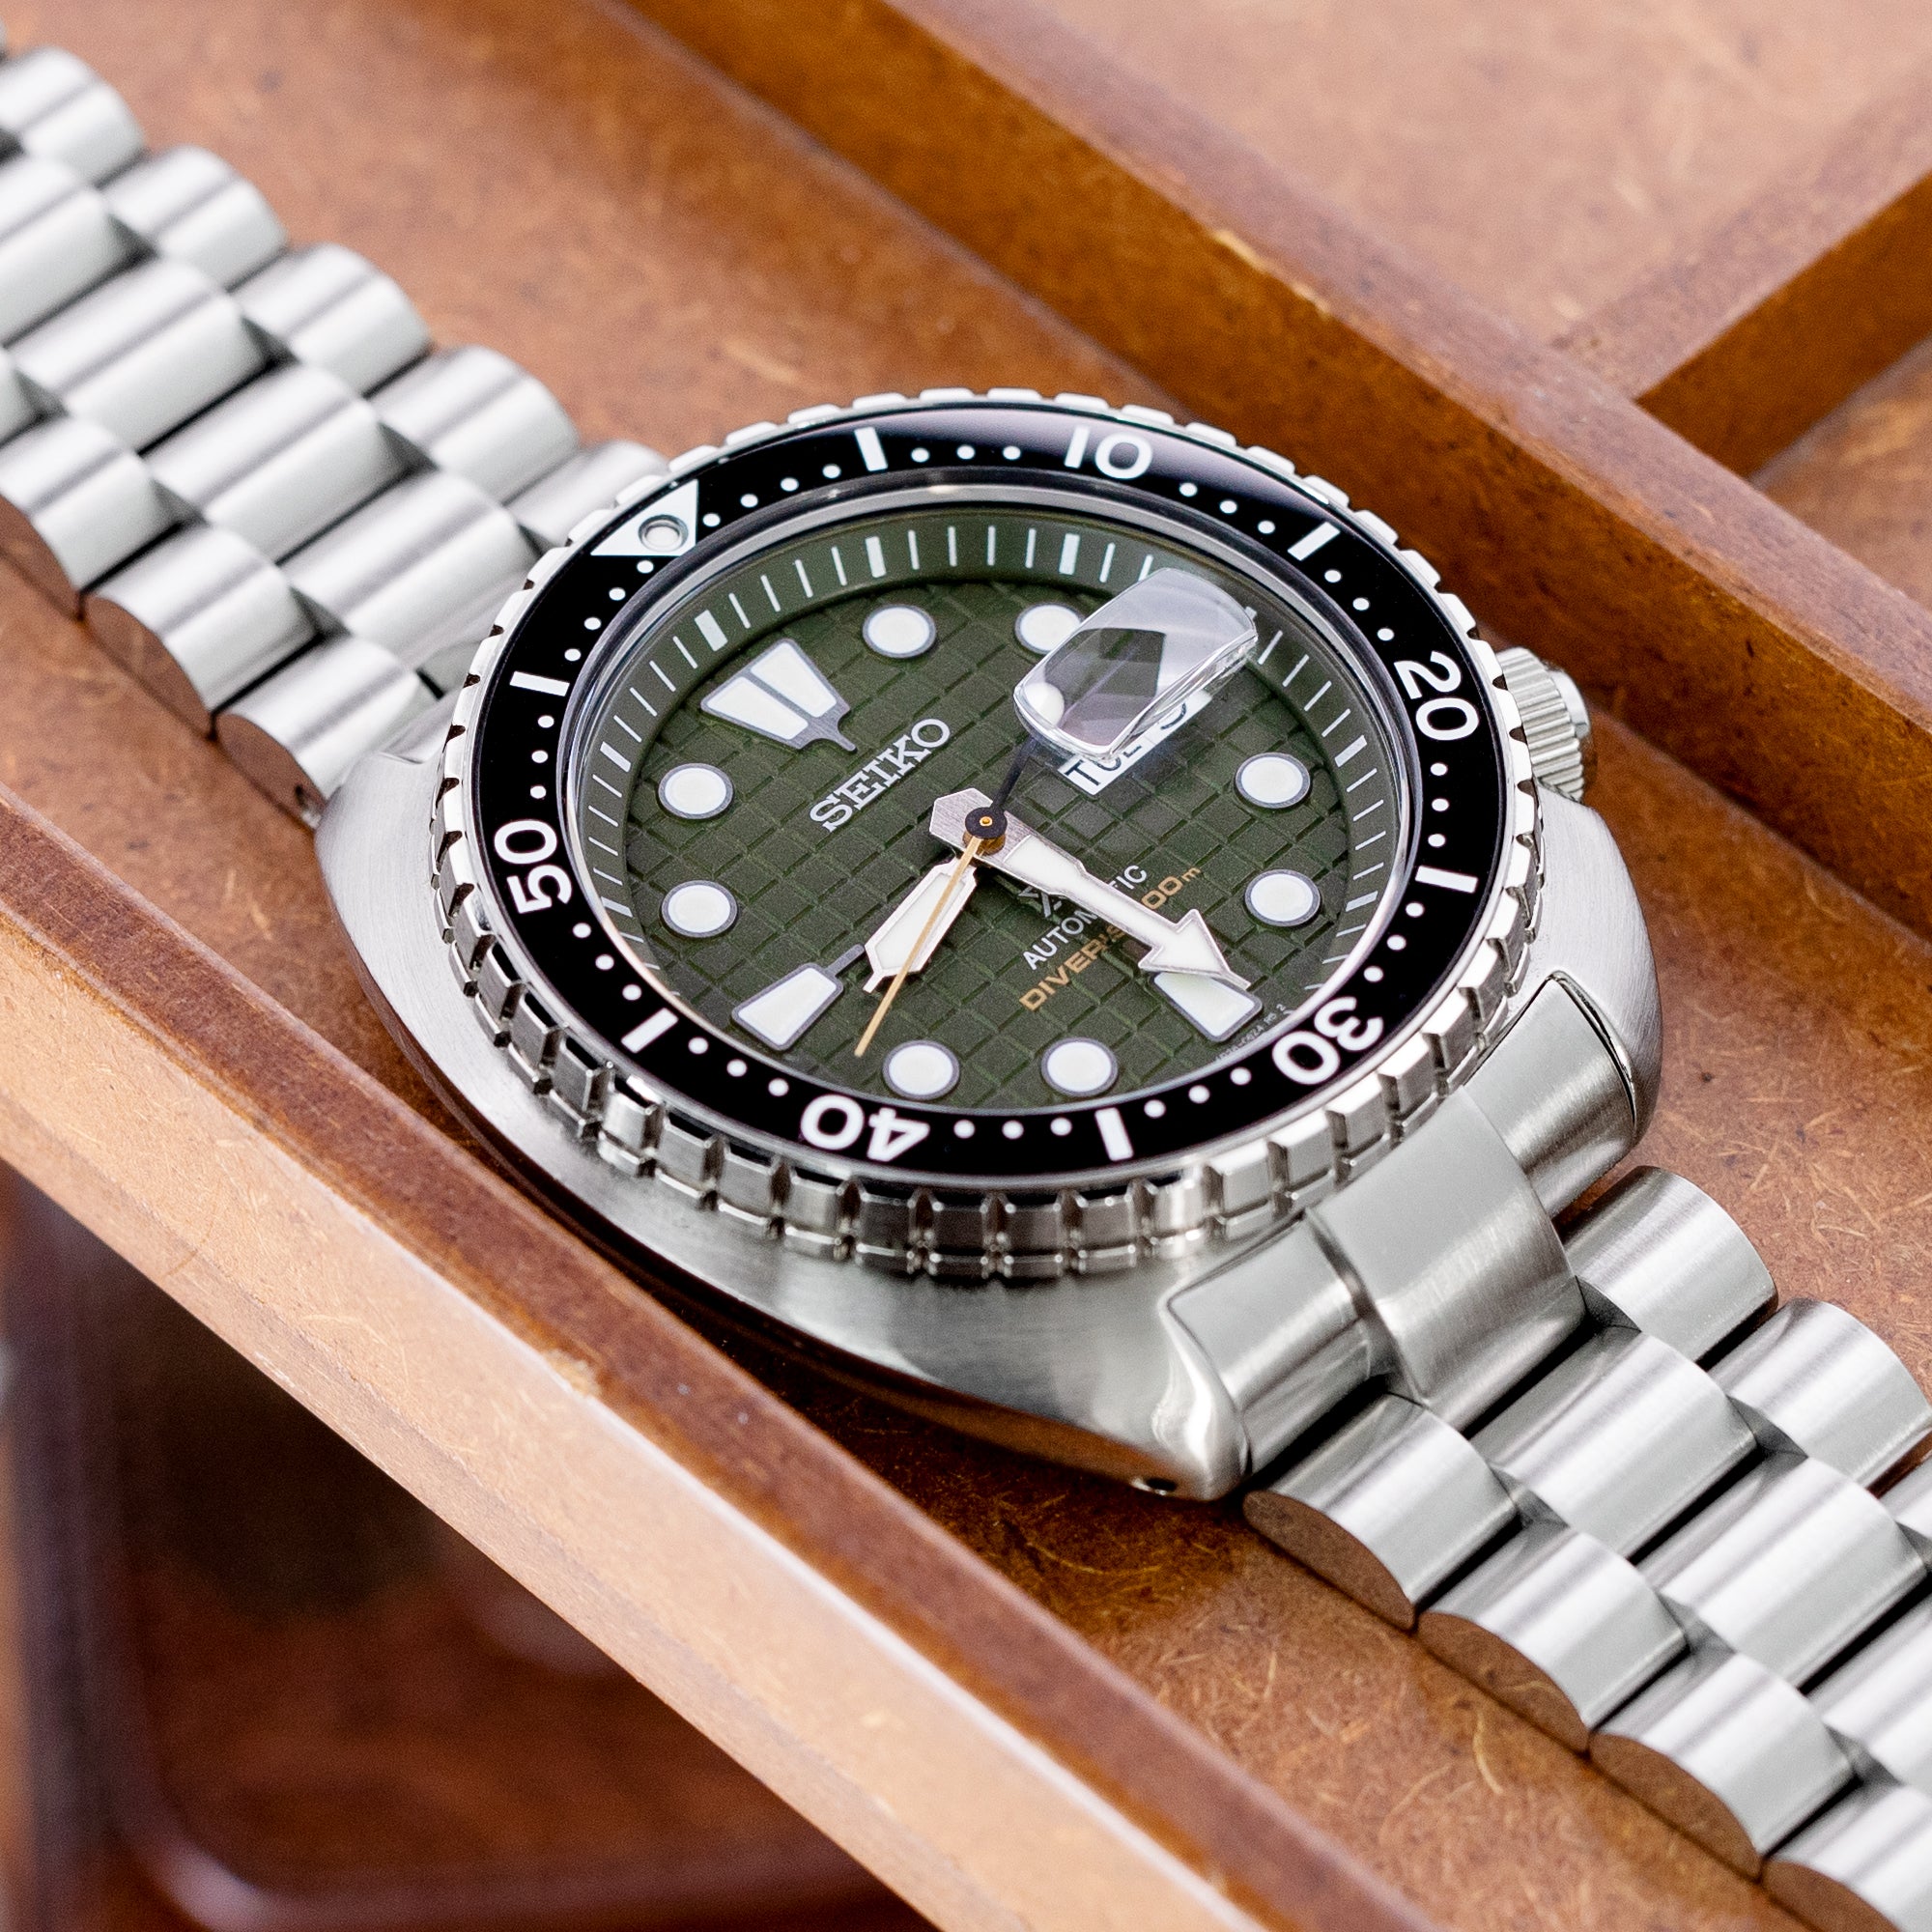 SRPE07] [king turtle] with a strap code jubilee bracelet : r/Seiko